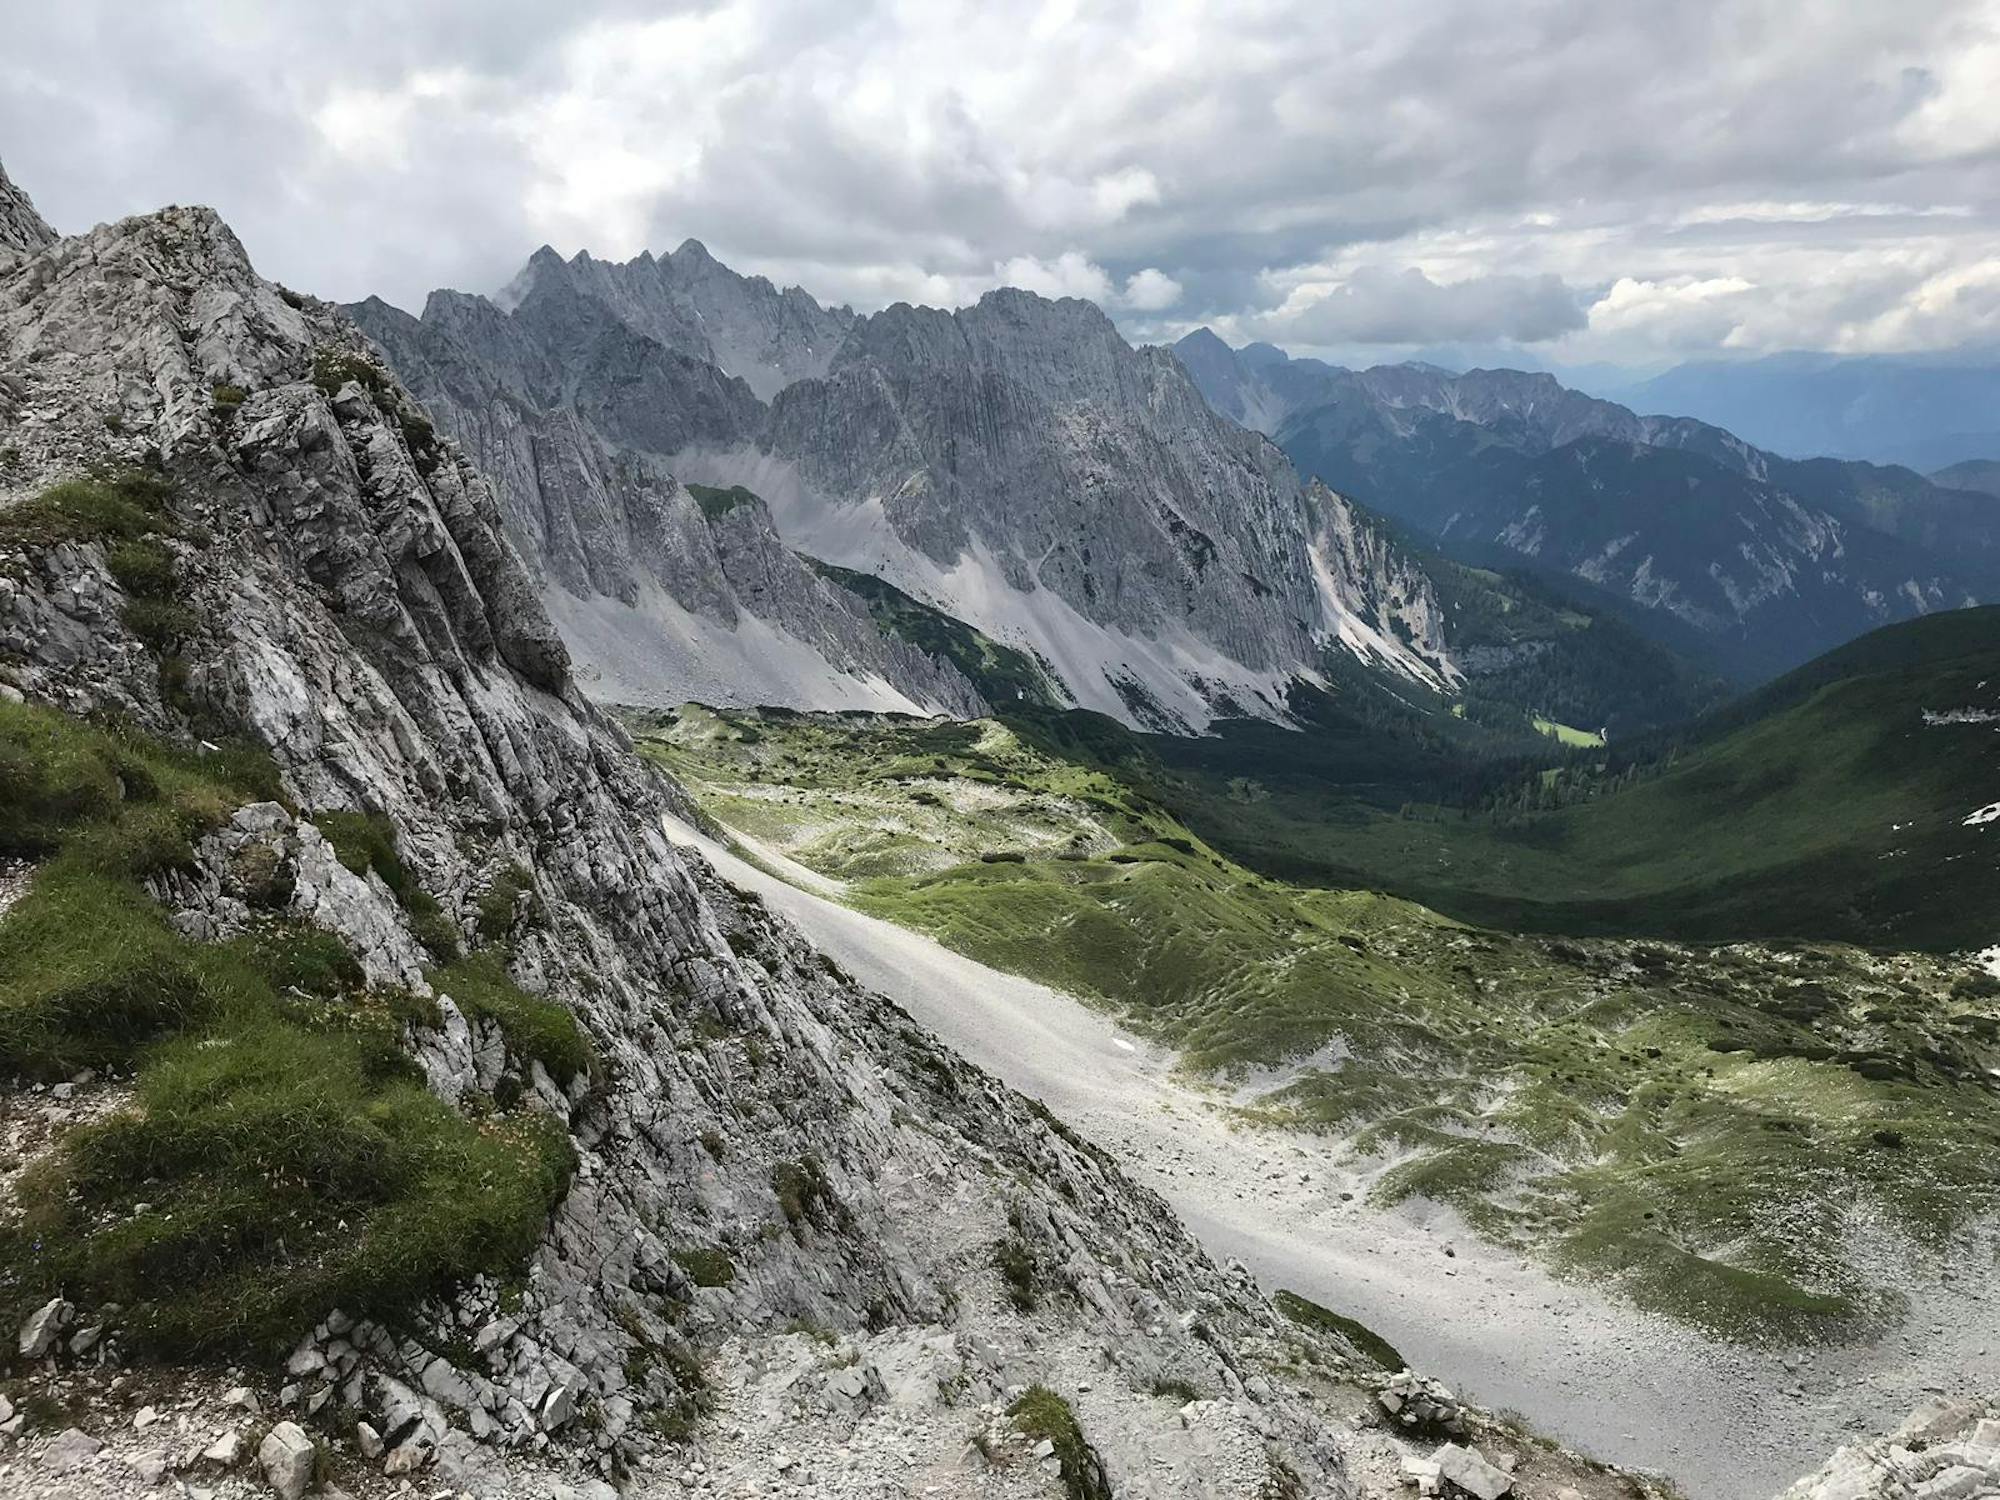 Looking into the northern Karwendel range from the first section of the hike.